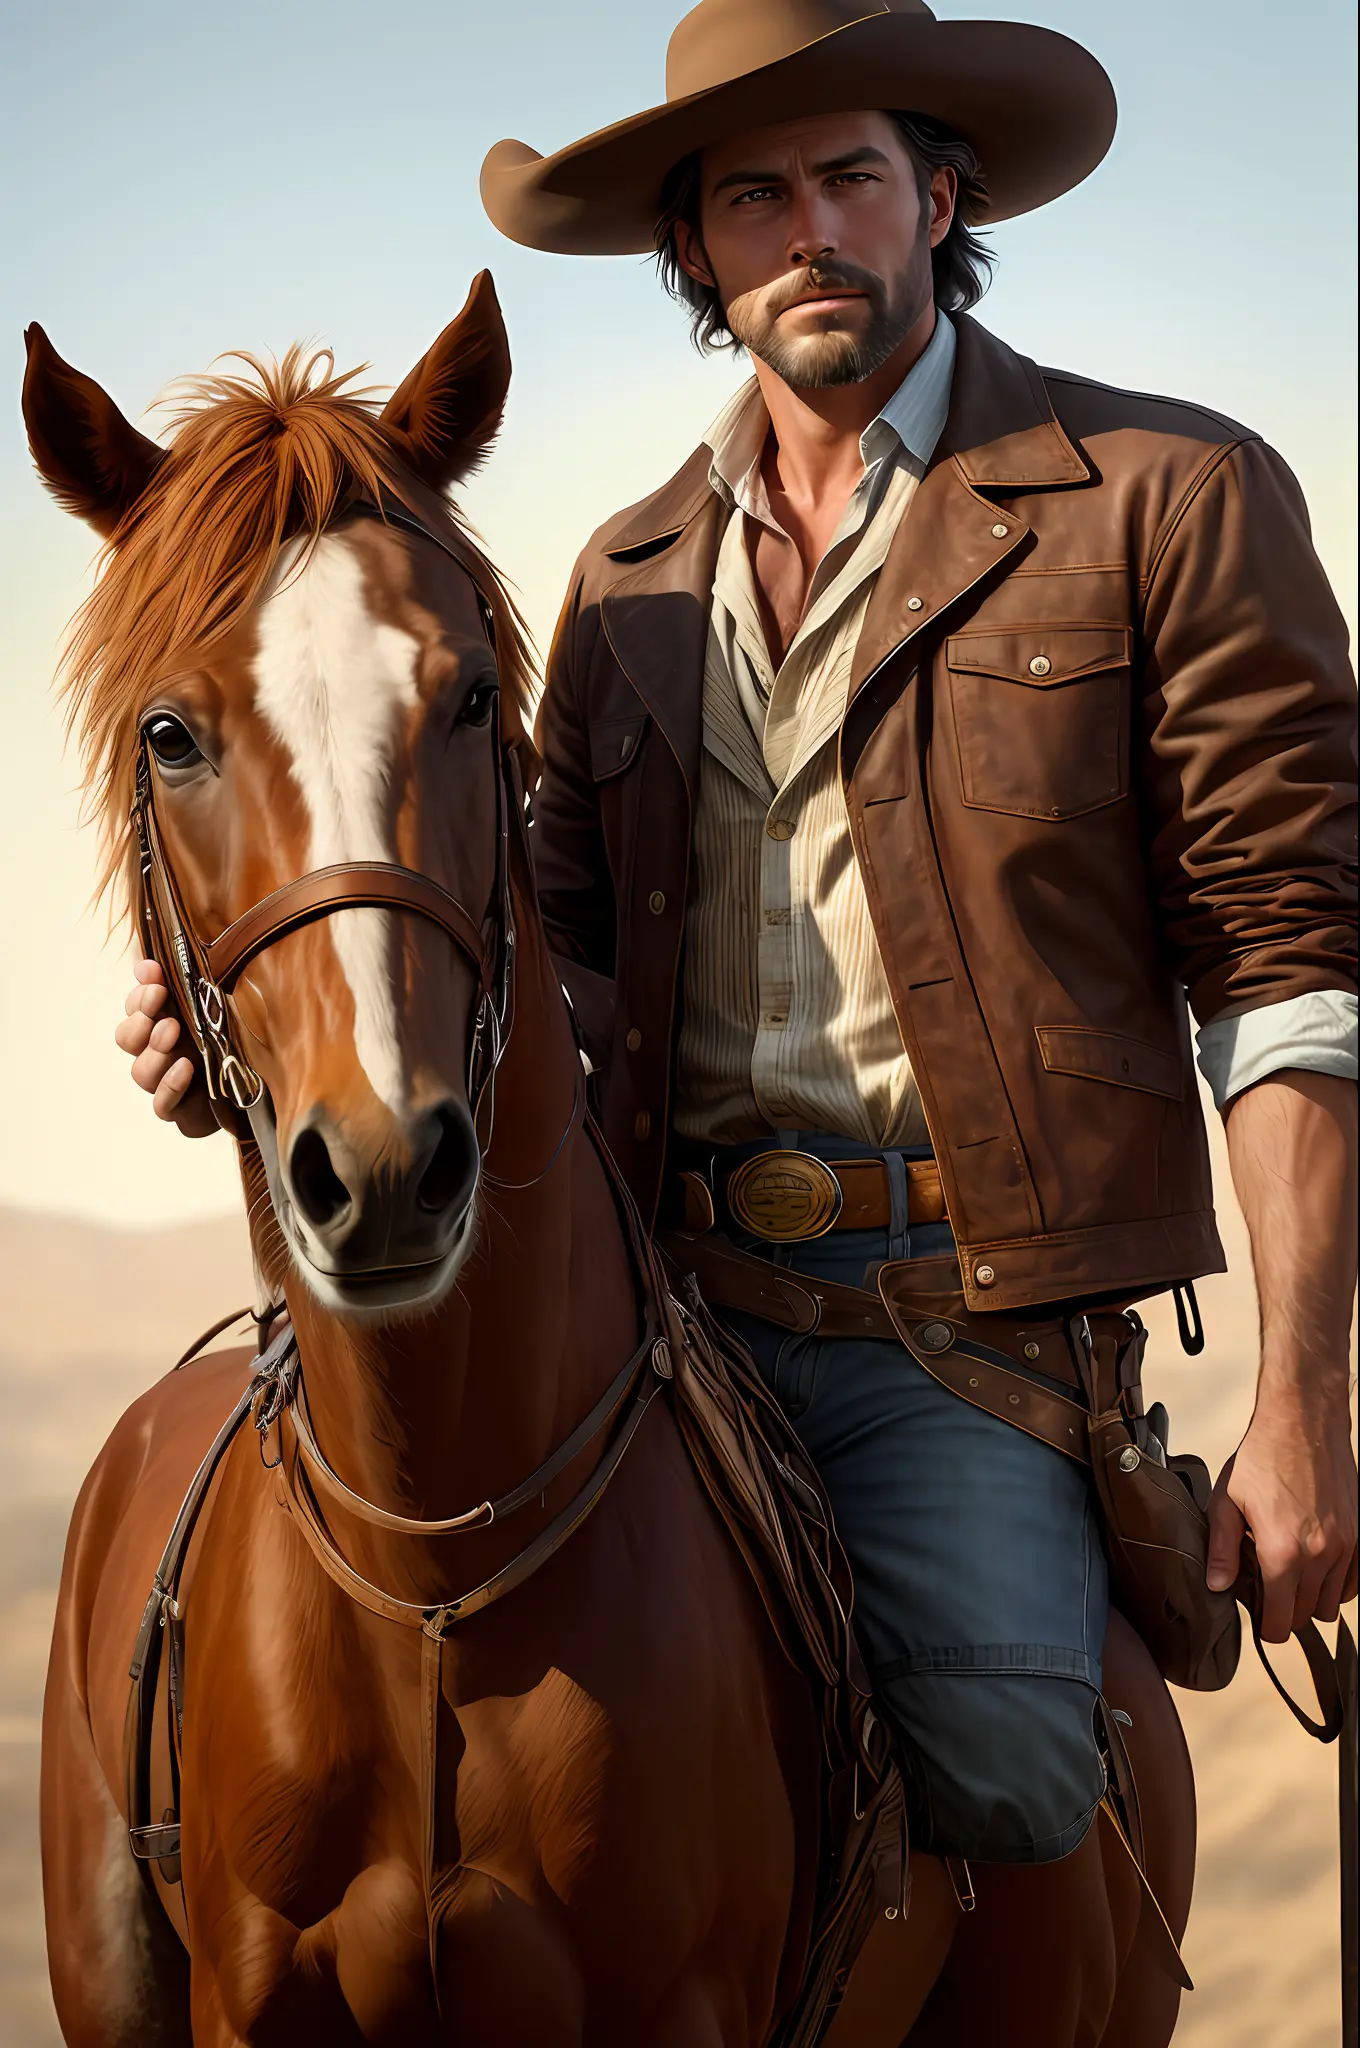 A handsome man with a naked torso rides a horse and exudes confidence, a cowboy hat pulled over his eyes. Wild West with a touch of modern style. The illustrative style draws inspiration from the bold and vibrant works of Charles Marion Russell, known for ...